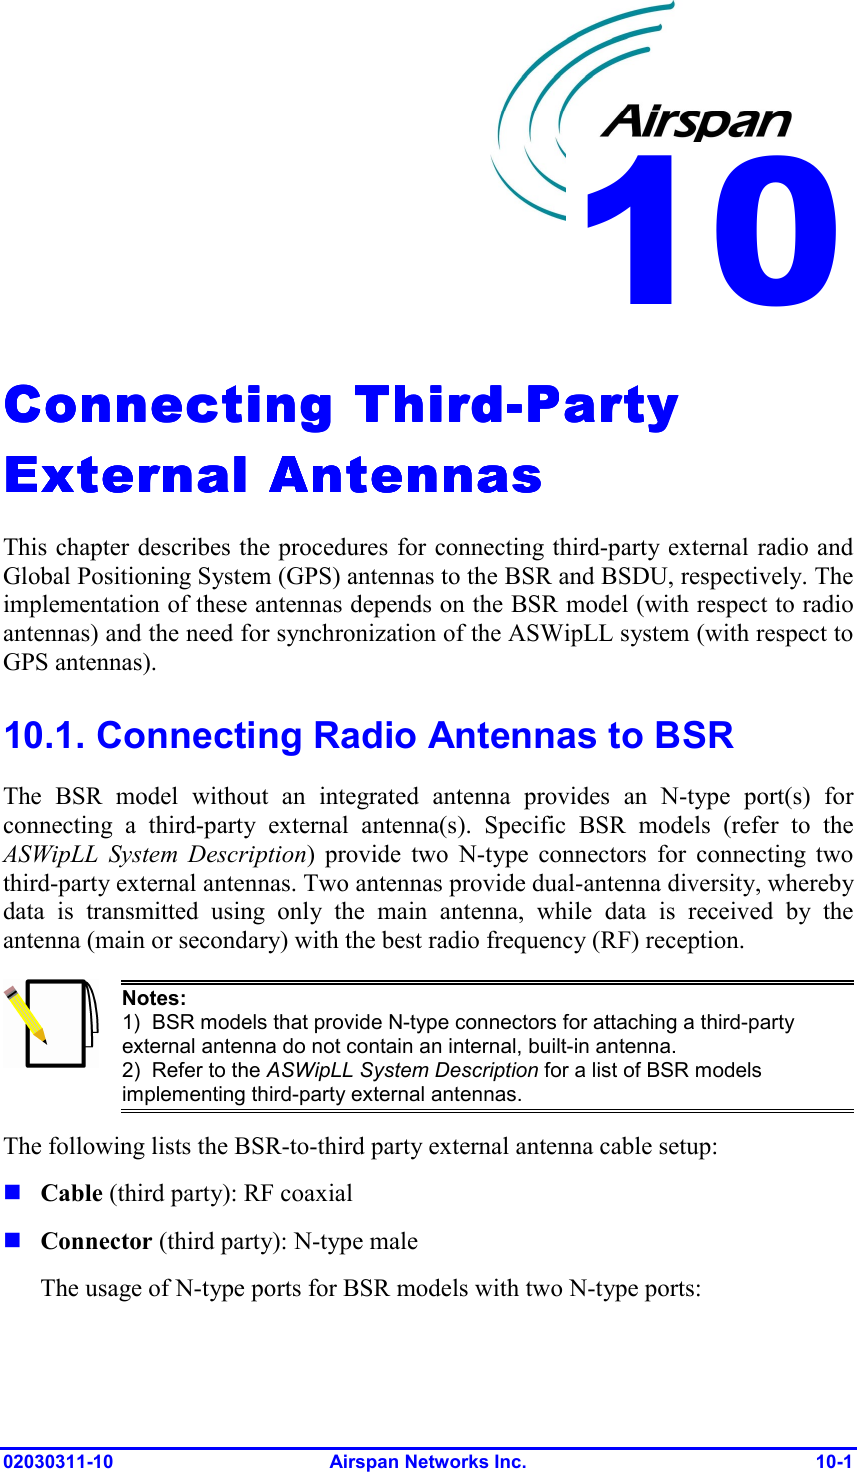  02030311-10 Airspan Networks Inc.  10-1 Connecting ThirdConnecting ThirdConnecting ThirdConnecting Third----Party Party Party Party External AntennasExternal AntennasExternal AntennasExternal Antennas    This chapter describes the procedures for connecting third-party external radio and Global Positioning System (GPS) antennas to the BSR and BSDU, respectively. The implementation of these antennas depends on the BSR model (with respect to radio antennas) and the need for synchronization of the ASWipLL system (with respect to GPS antennas).  10.1. Connecting Radio Antennas to BSR The BSR model without an integrated antenna provides an N-type port(s) for connecting a third-party external antenna(s). Specific BSR models (refer to the ASWipLL System Description) provide two N-type connectors for connecting two third-party external antennas. Two antennas provide dual-antenna diversity, whereby data is transmitted using only the main antenna, while data is received by the antenna (main or secondary) with the best radio frequency (RF) reception.  Notes: 1)  BSR models that provide N-type connectors for attaching a third-party external antenna do not contain an internal, built-in antenna. 2)  Refer to the ASWipLL System Description for a list of BSR models implementing third-party external antennas.  The following lists the BSR-to-third party external antenna cable setup:  Cable (third party): RF coaxial   Connector (third party): N-type male  The usage of N-type ports for BSR models with two N-type ports: 10